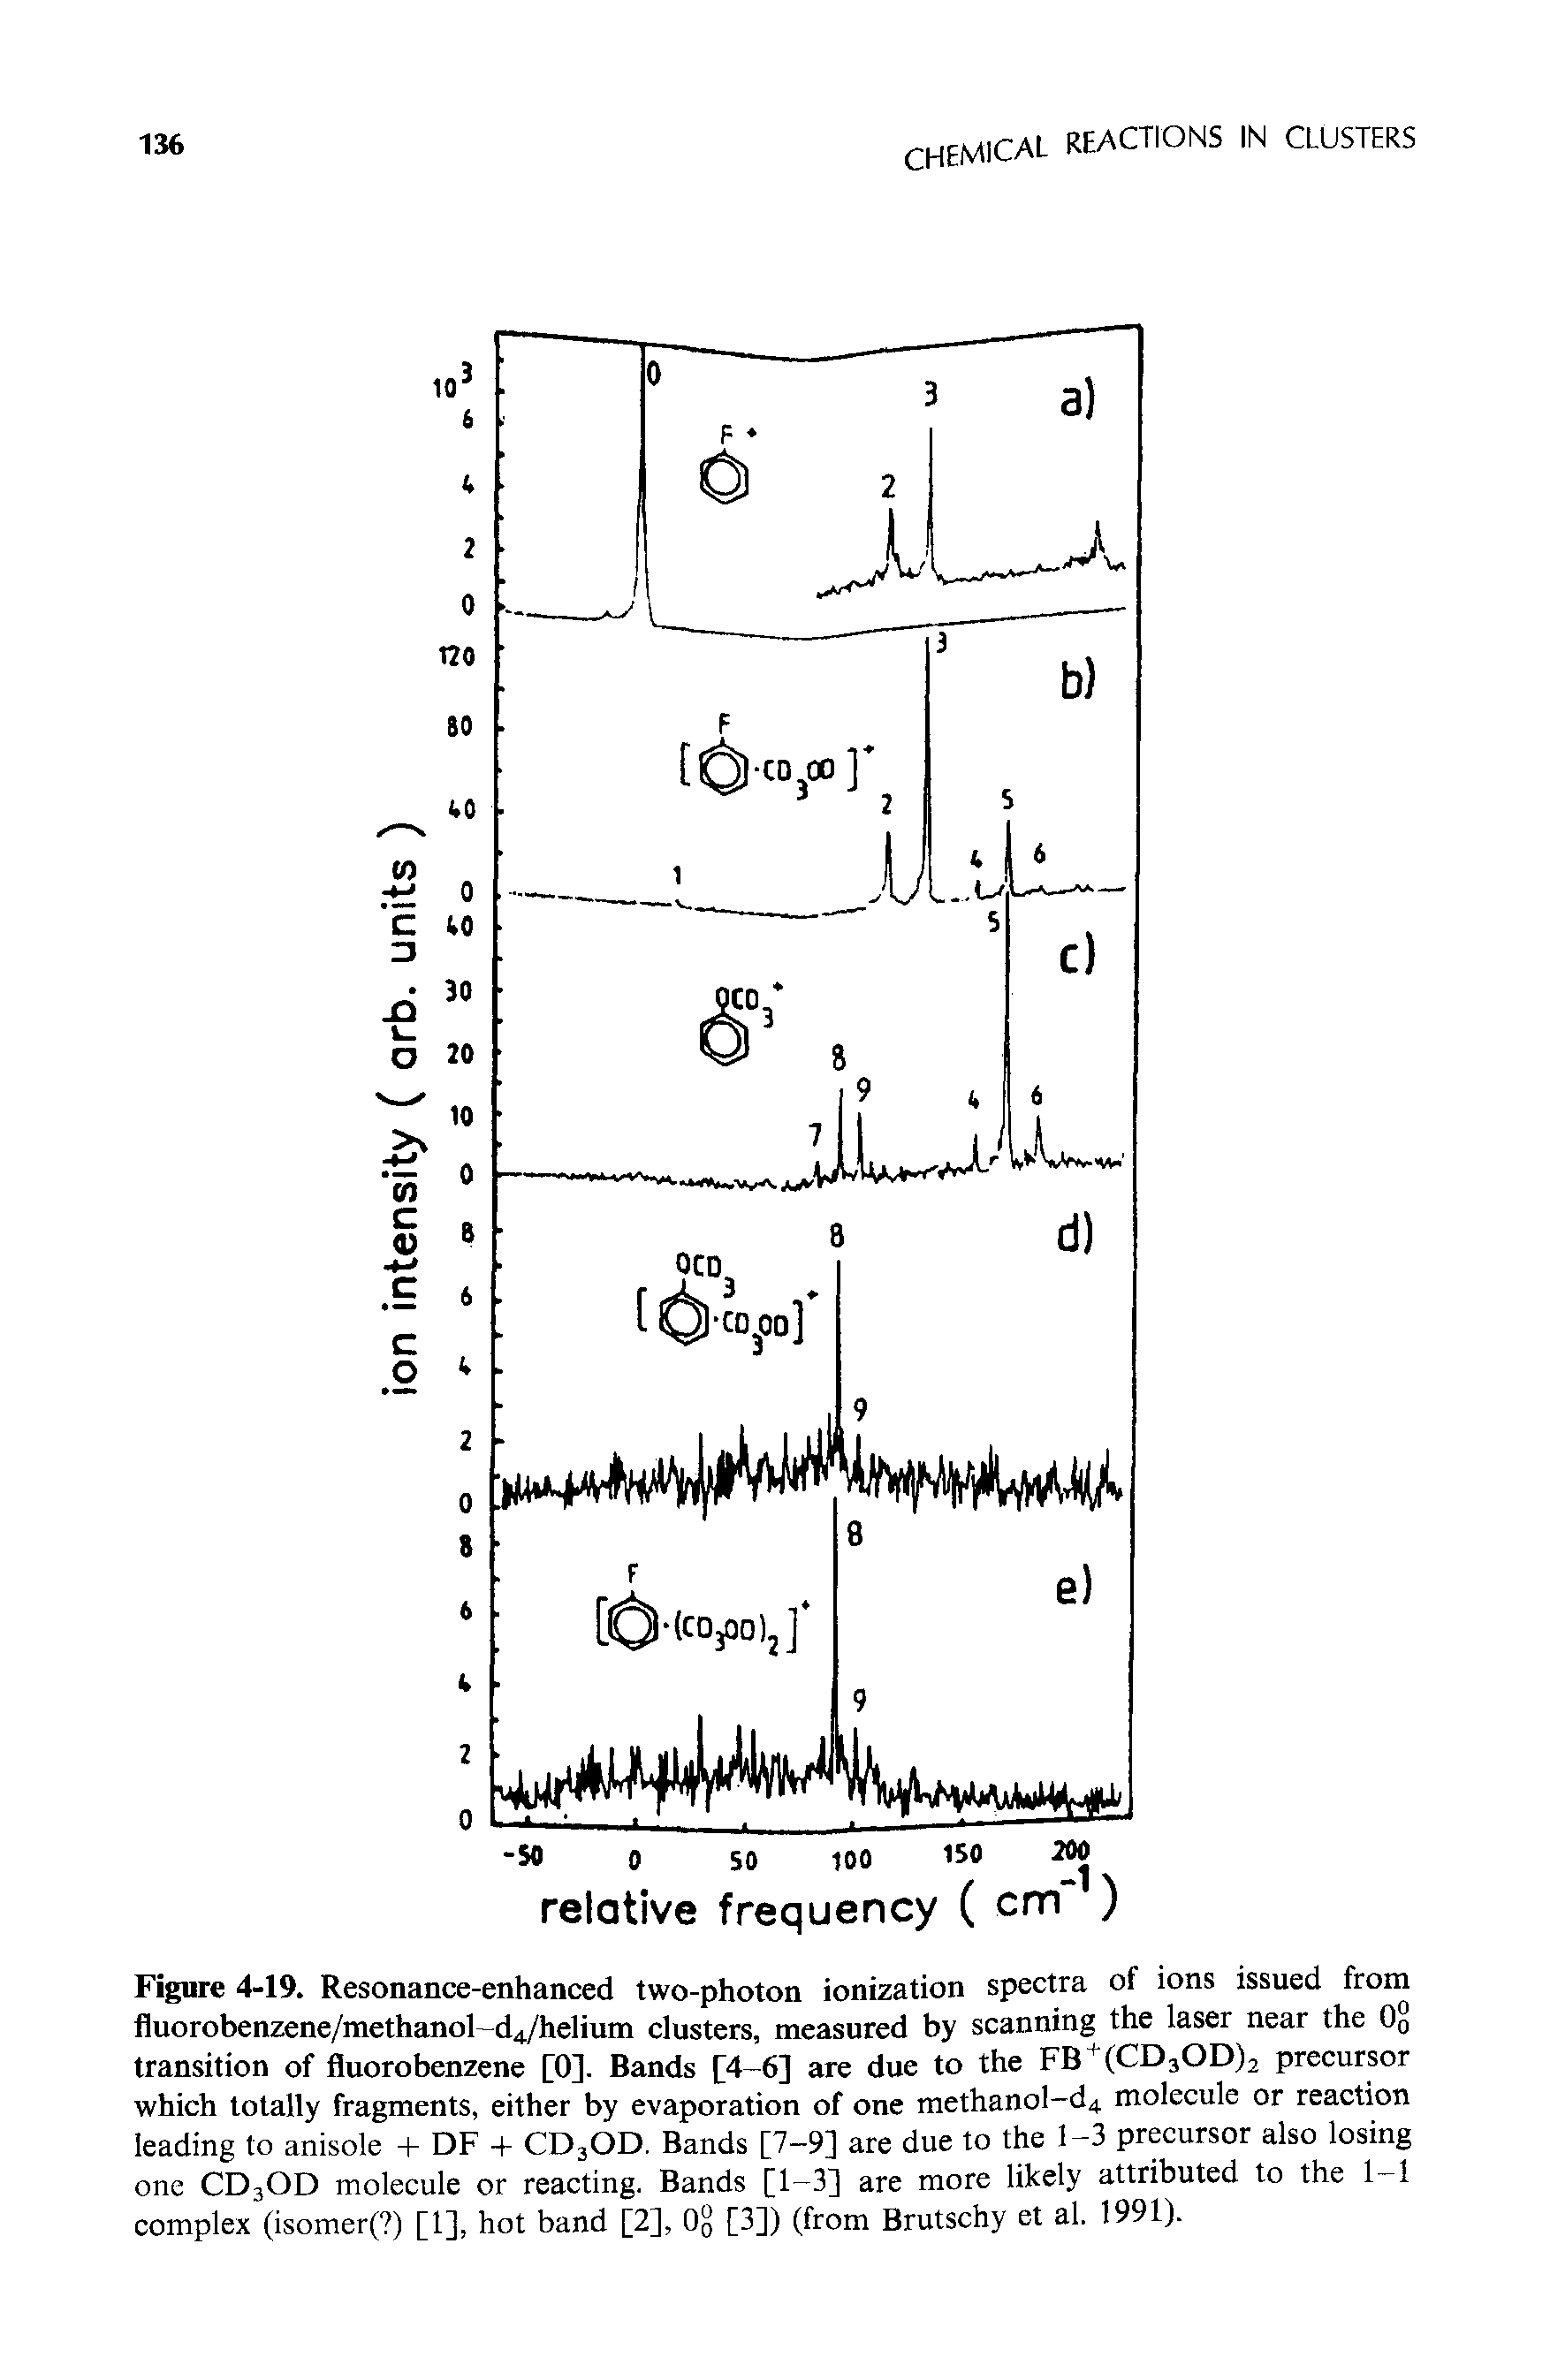 Figure 4-19. Resonance-enhanced two-photon ionization spectra of ions issued from fluorobenzene/methanol d4/helium clusters, measured by scanning the laser near the 00 transition of fluorobenzene [0]. Bands [4-6] are due to the FB+(CD3OD)2 precursor which totally fragments, either by evaporation of one methanol-d4 molecule or reaction leading to anisole + DF + CD3OD. Bands [7-9] are due to the 1-3 precursor also losing one CD3OD molecule or reacting. Bands [1-3] are more likely attributed to the 1-1 complex (isomer( ) [1], hot band [2], 0q [3]) (from Brutschy et al. 1991).